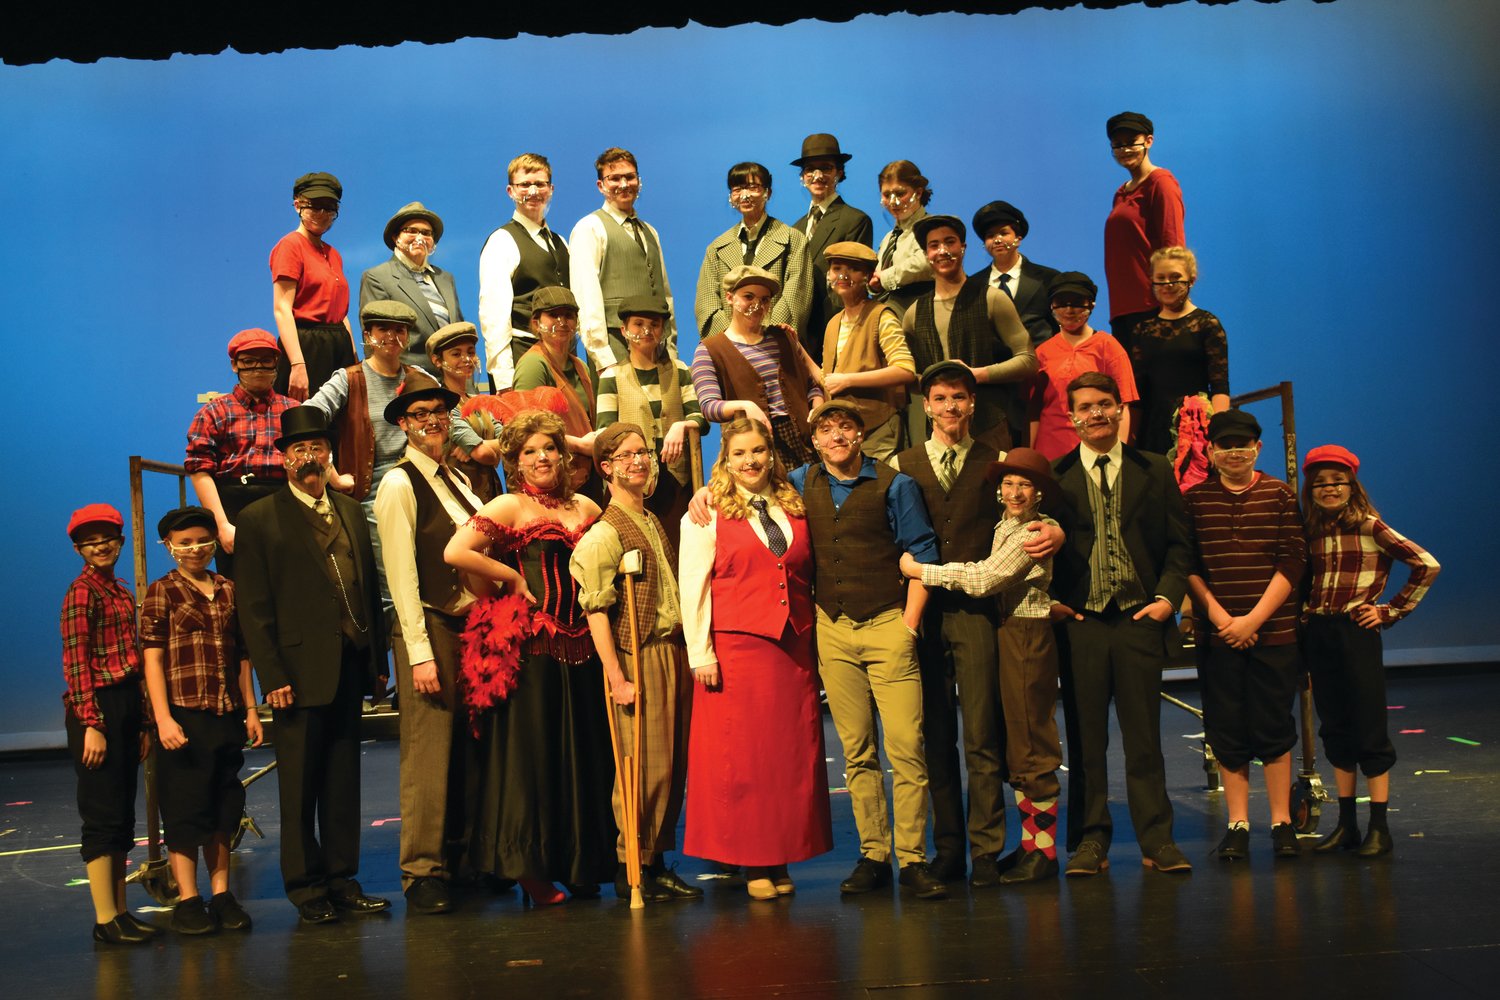 The cast of “Newsies!: The Musical” will take the stage this weekend at Crawfordsville High School. The show is open to the public with pre-sale tickets.